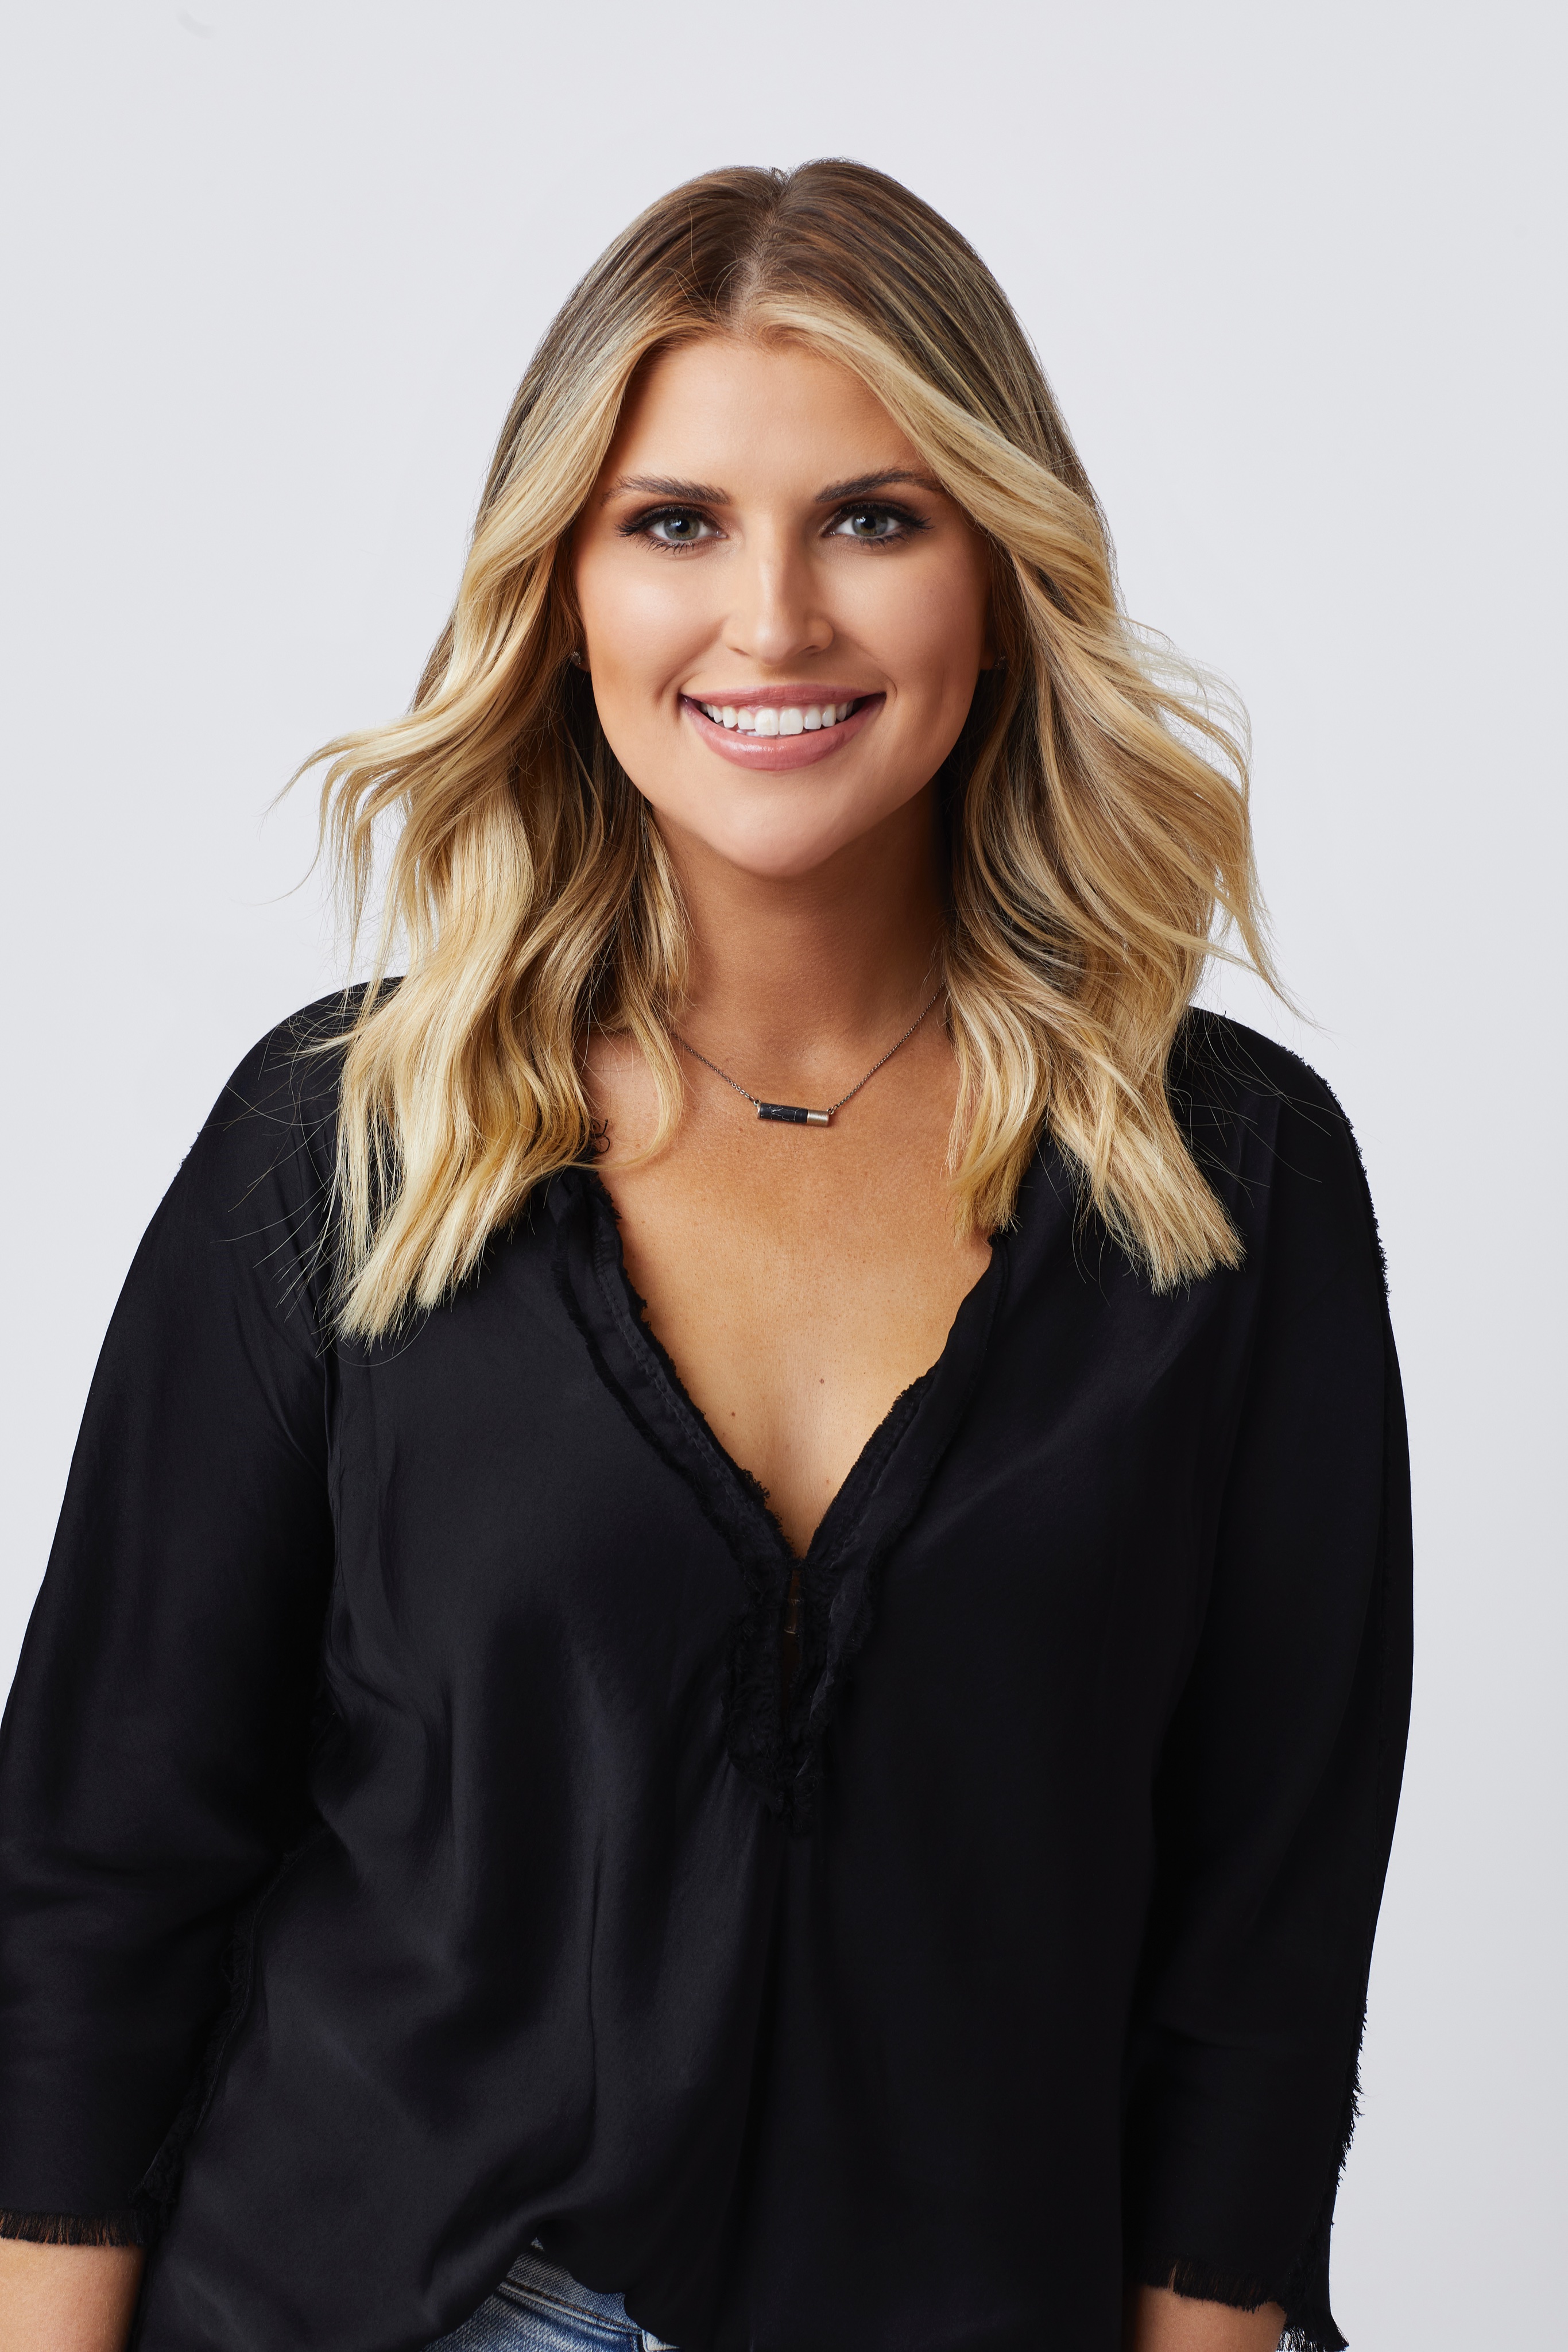 Claire Heilig - Bachelor 26 - Discussion - **Sleuthing Spoilers** FGrWZF_VgAMaG1D?format=jpg&name=4096x4096